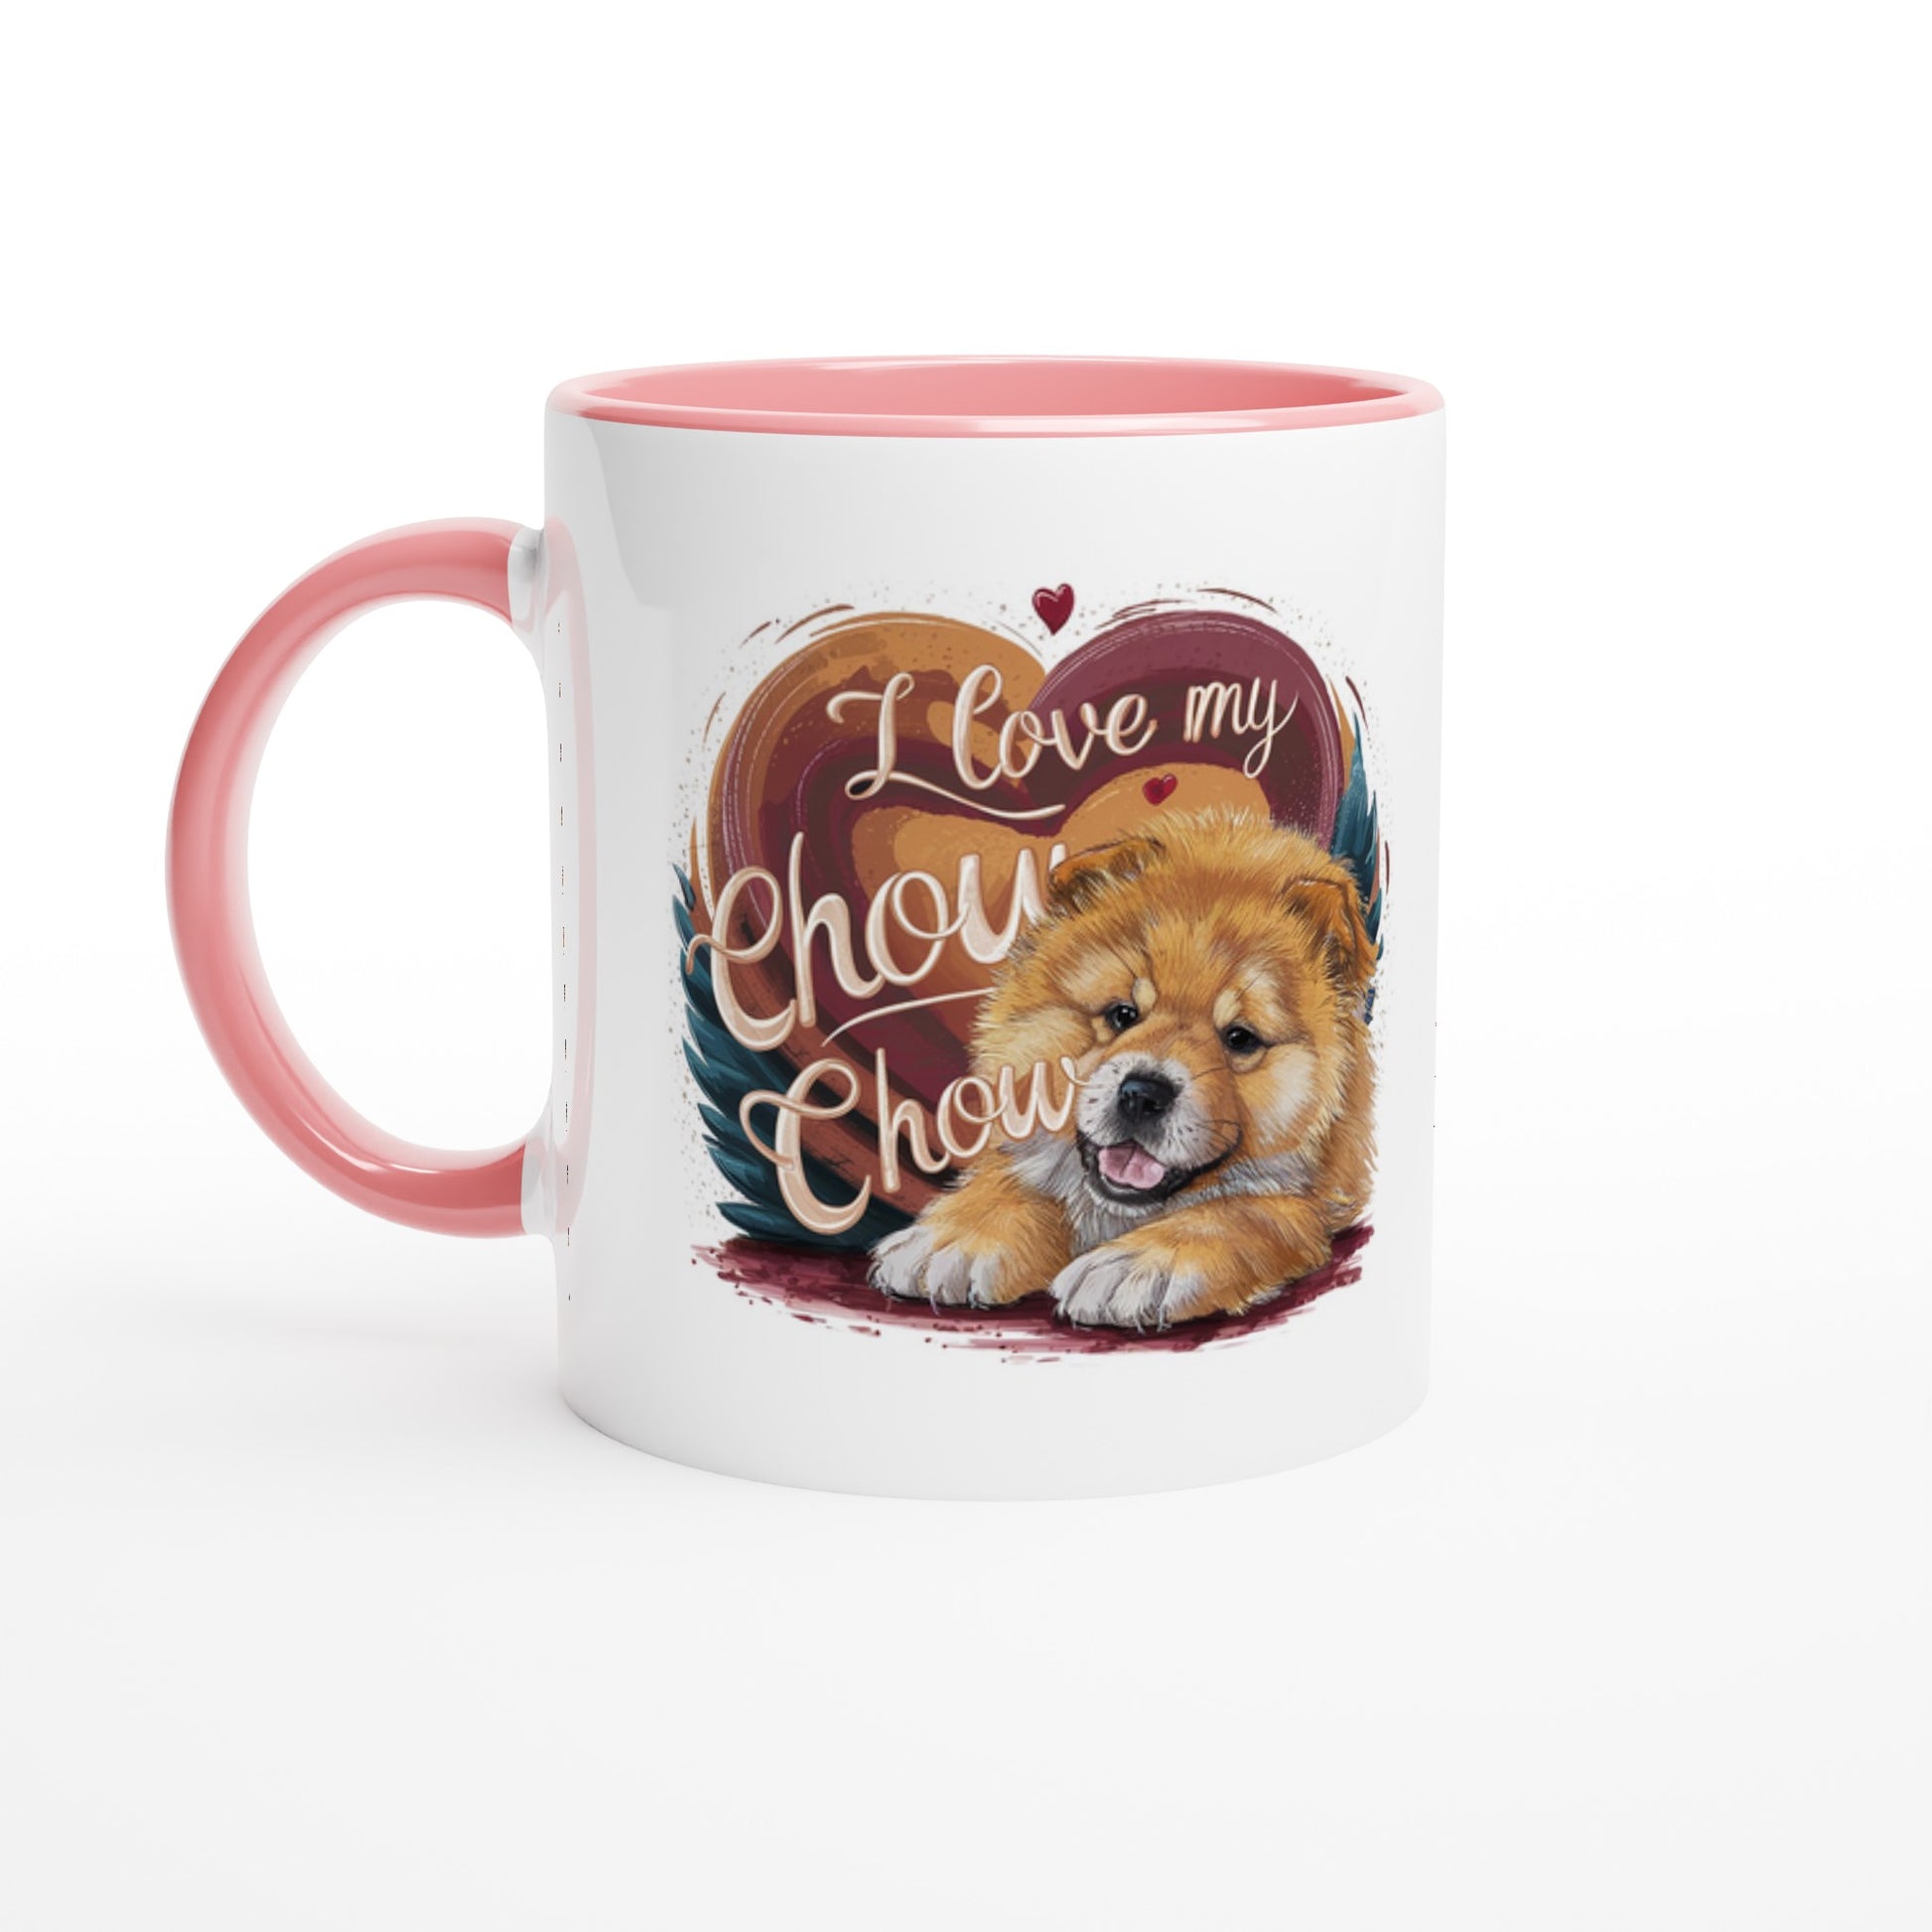 An coffee mug with a design with the phrase: "I love my Chow Chow" and a cute chow chow puppy. Handle and inside of the mug color is pink